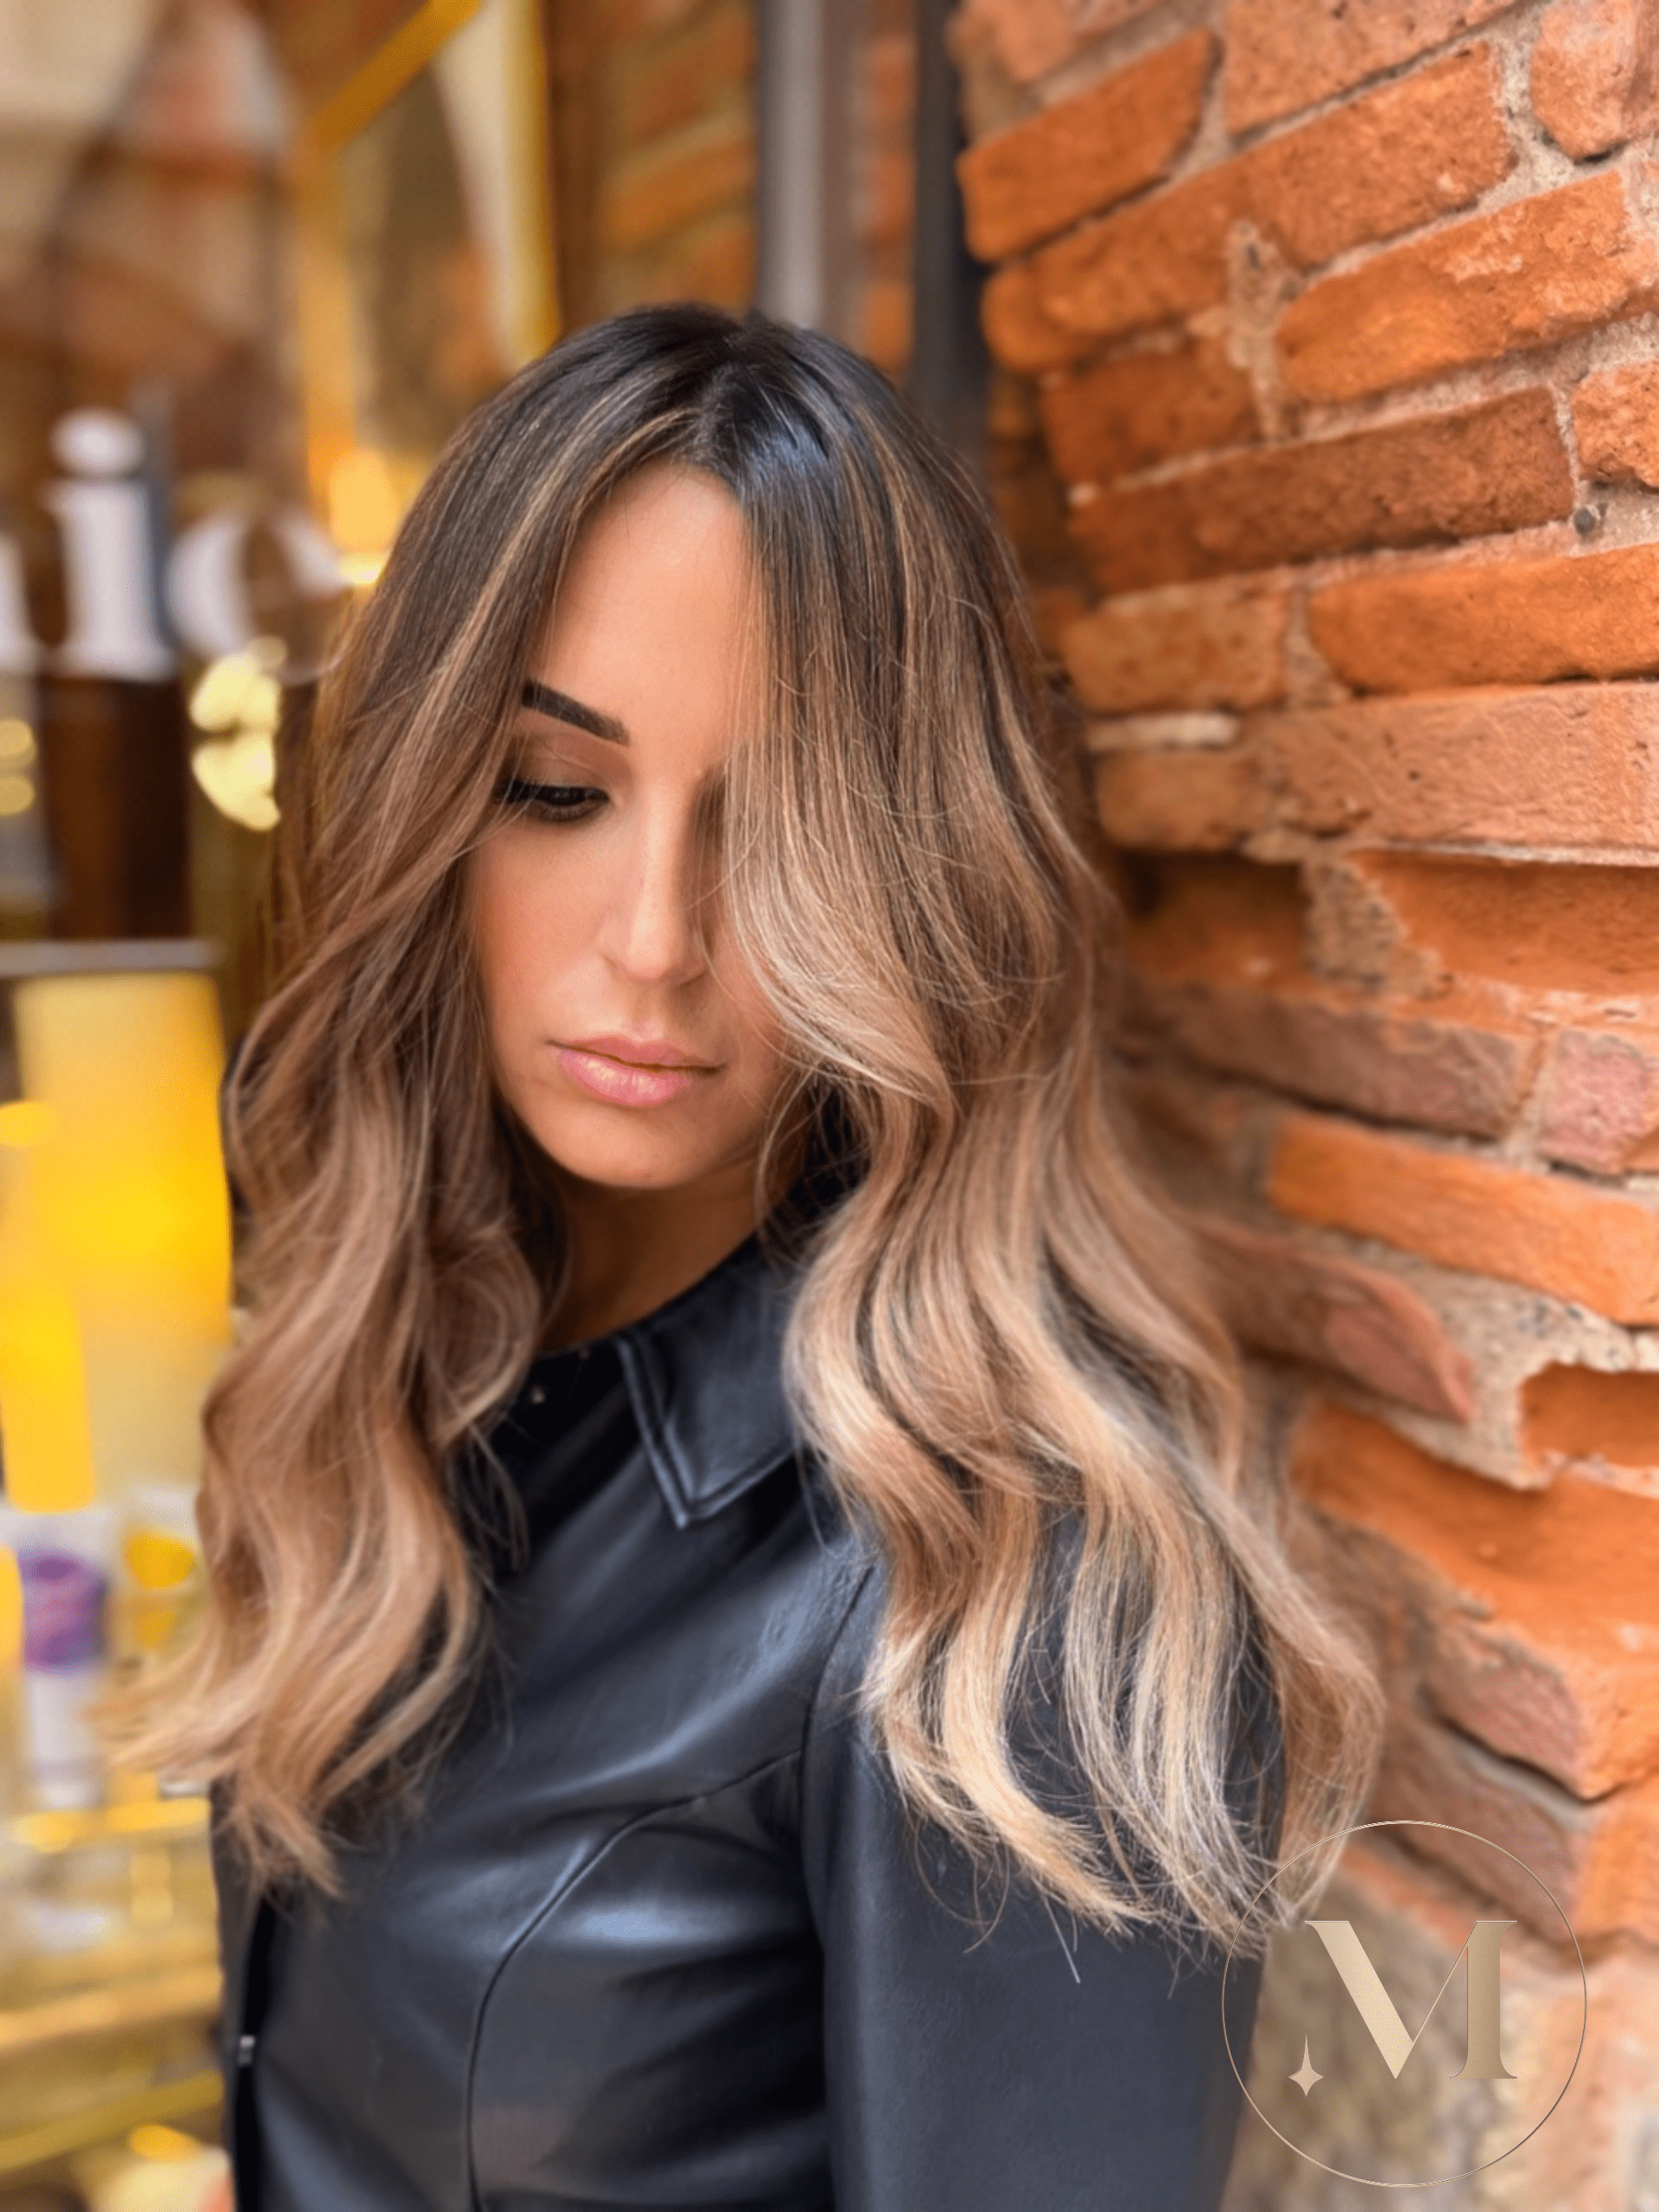 Coiffeur Toulouse - Balayage toulouse - By Mélanie